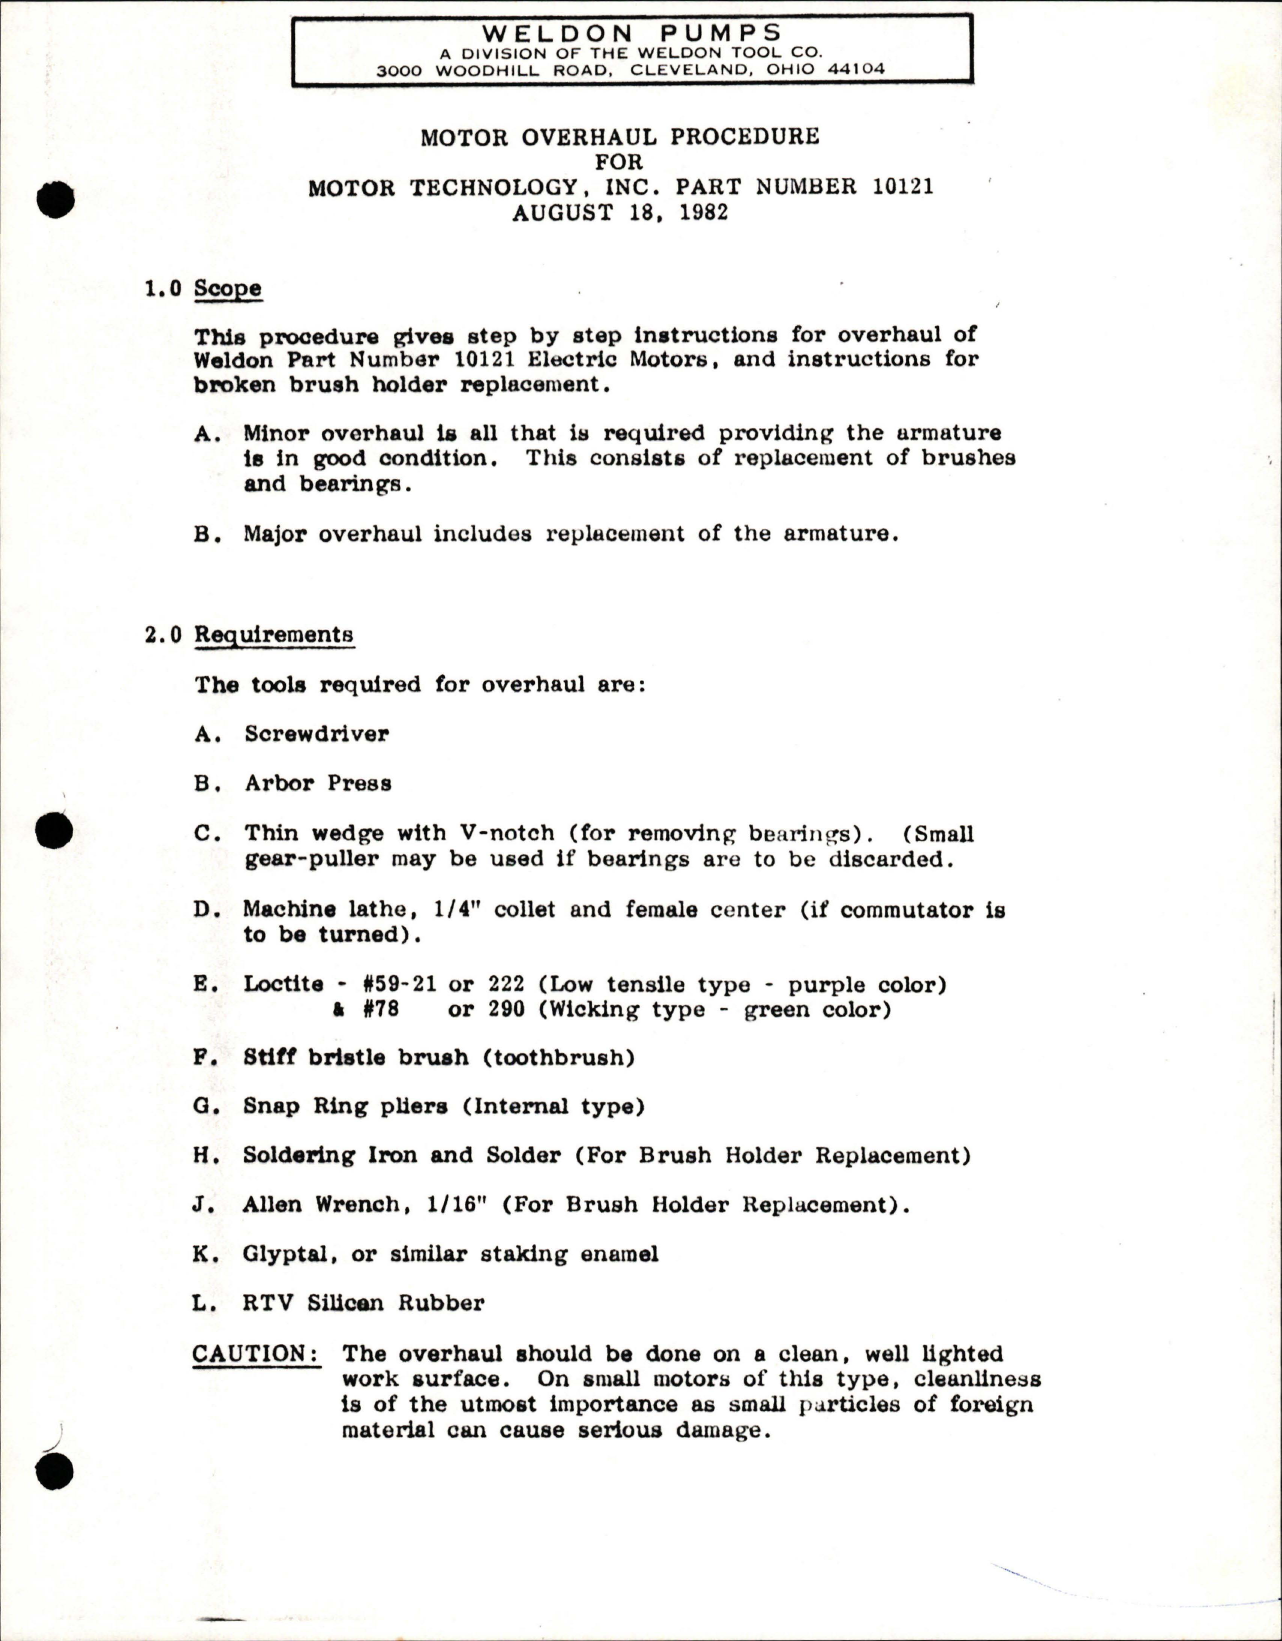 Sample page 1 from AirCorps Library document: Motor Overhaul Procedure Electric Motor - Part 10121 - Broken Brush Holder Replacement